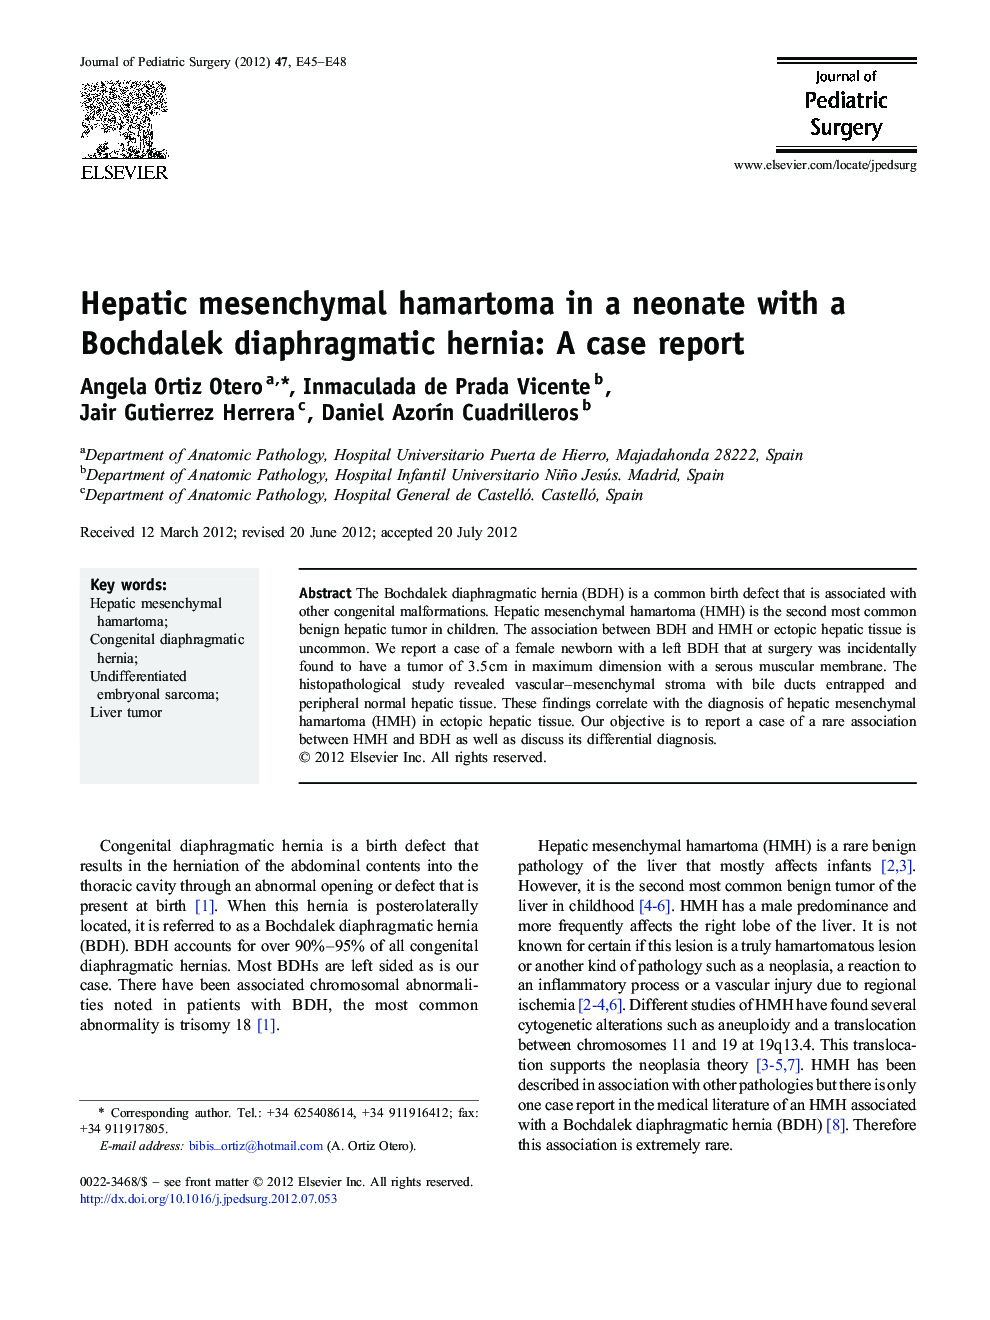 Hepatic mesenchymal hamartoma in a neonate with a Bochdalek diaphragmatic hernia: A case report